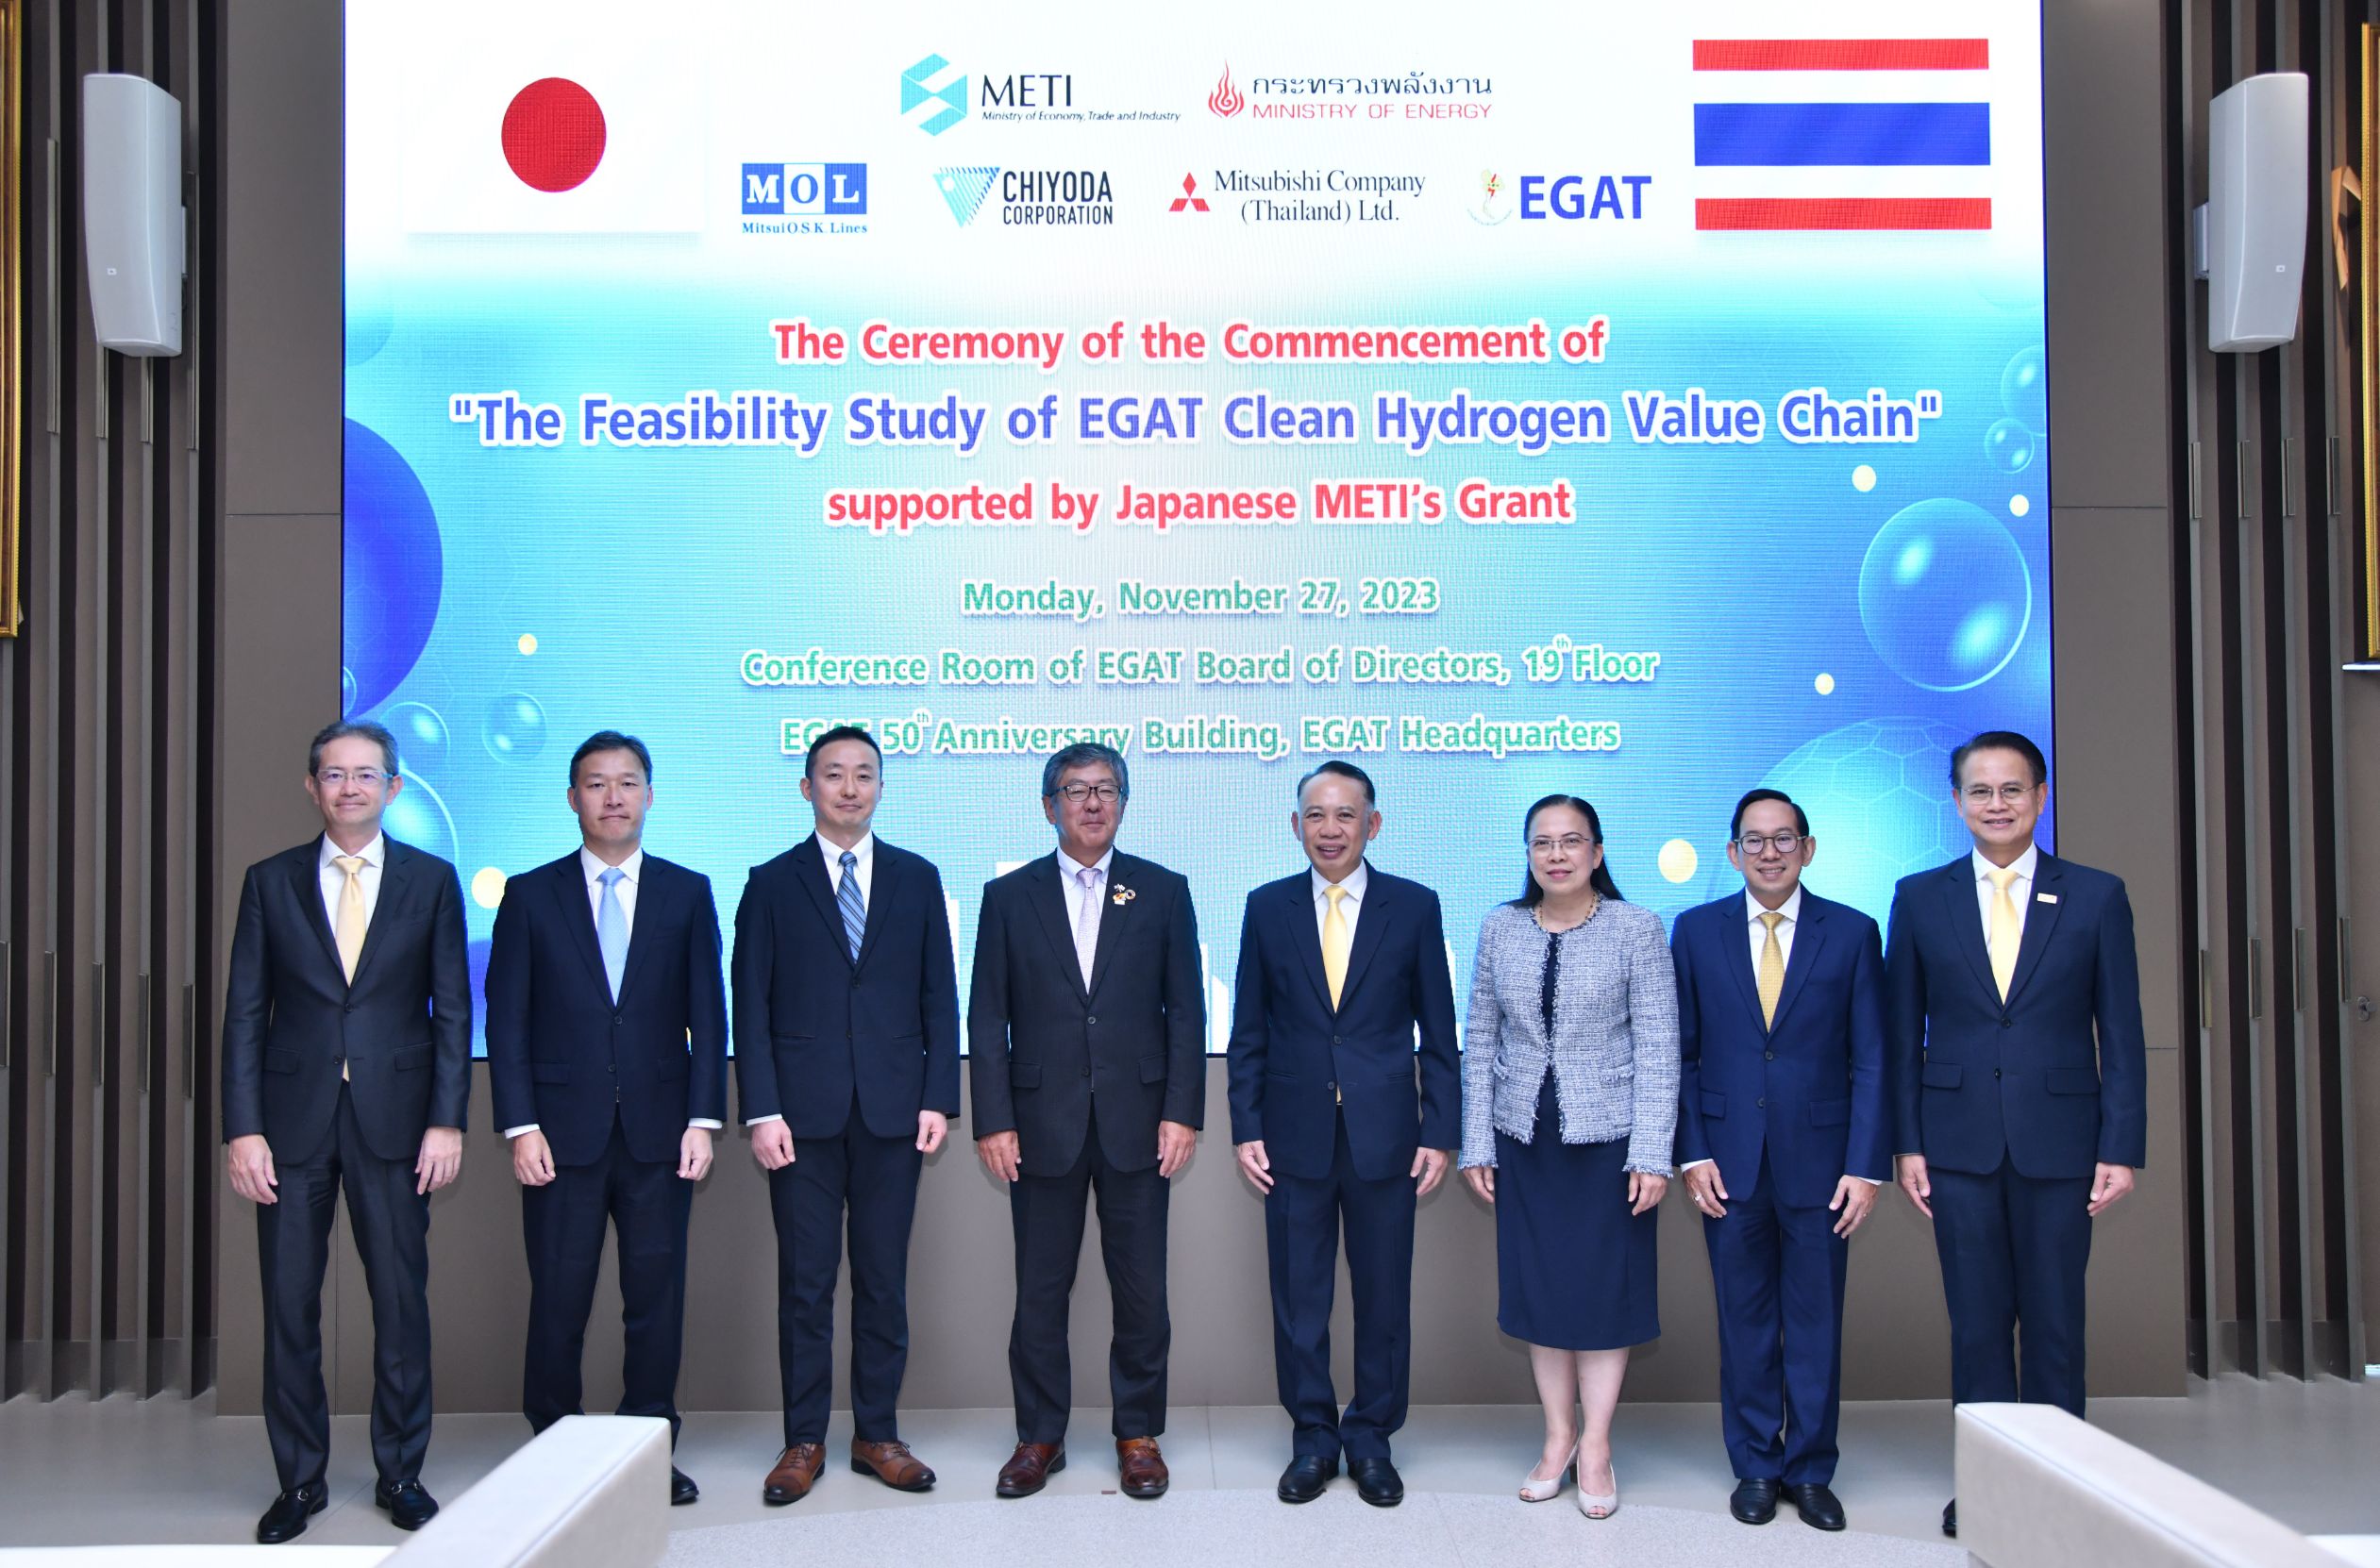 METI joins force with EGAT and three leading Japanese companies to kick off feasibility study on clean hydrogen and ammonia production in EGAT’s potential sites